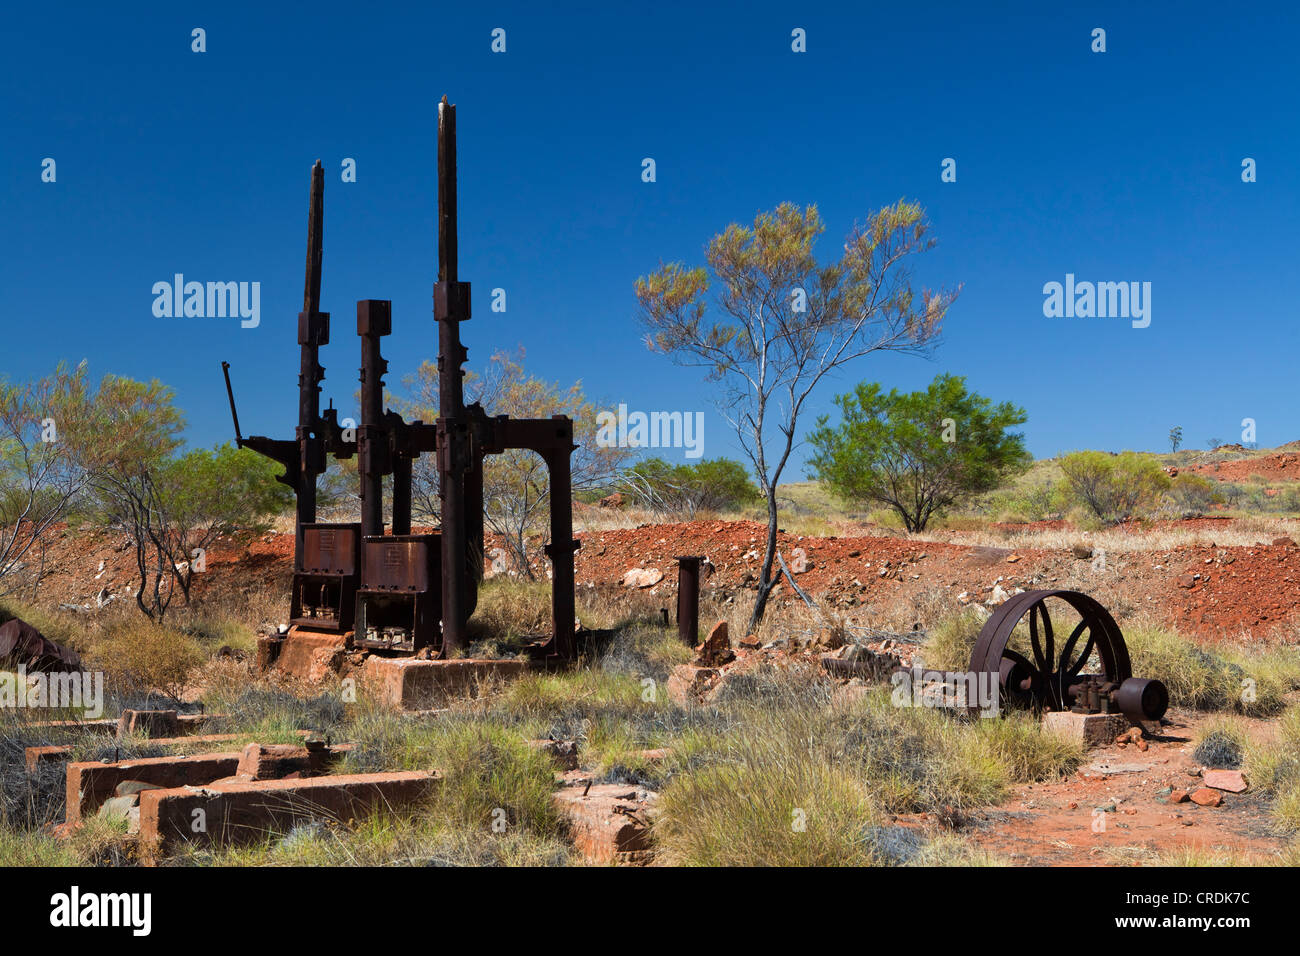 Rusty equipment from a long abandoned gold mine in Western Australia's outback, Marble Bar, Western Australia, Australia Stock Photo